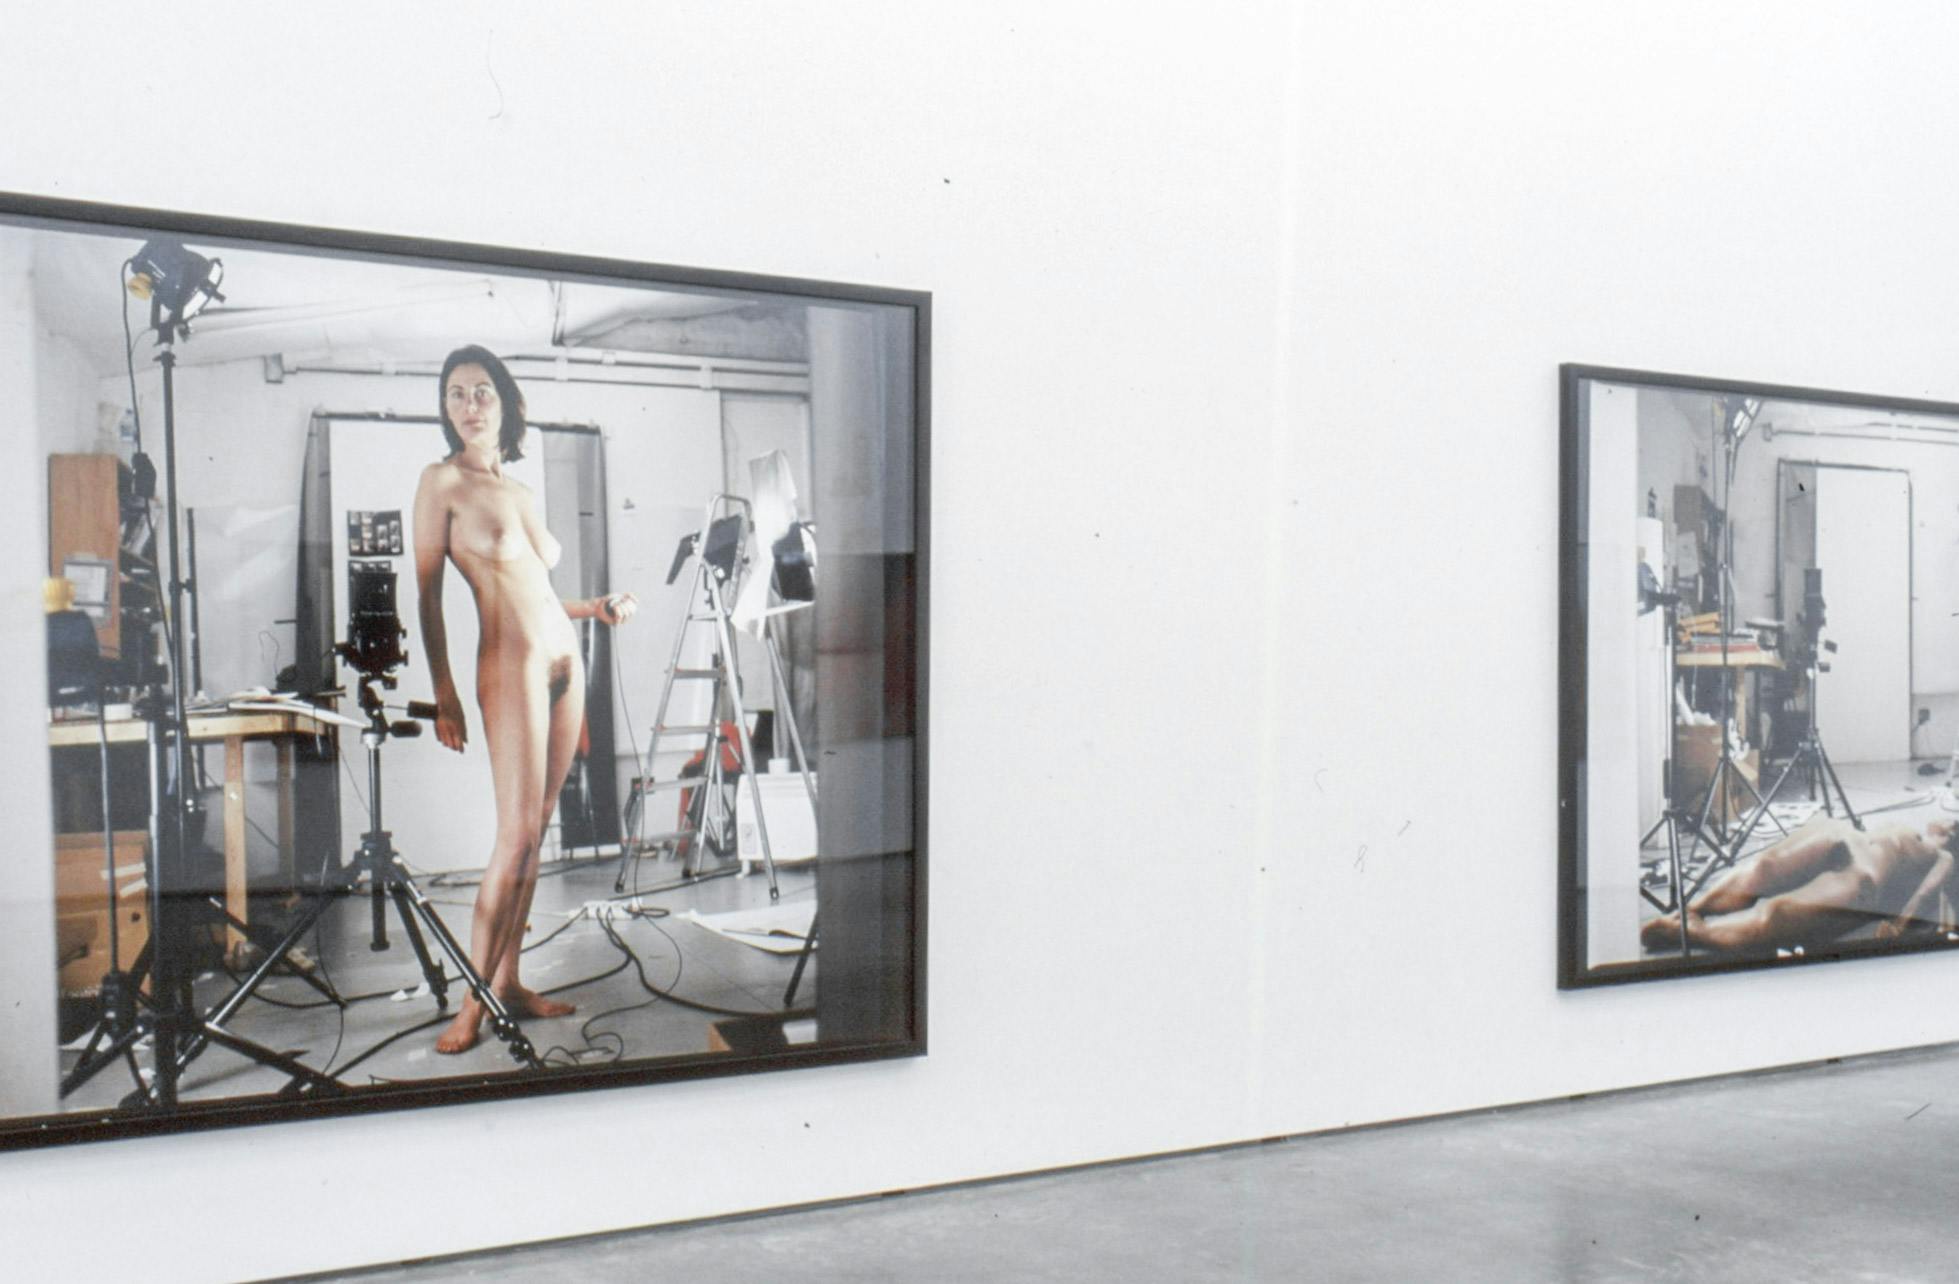 Several large-sized photographs are installed on a gallery wall. Those photographs show a naked woman posing in the middle of an artist studio.